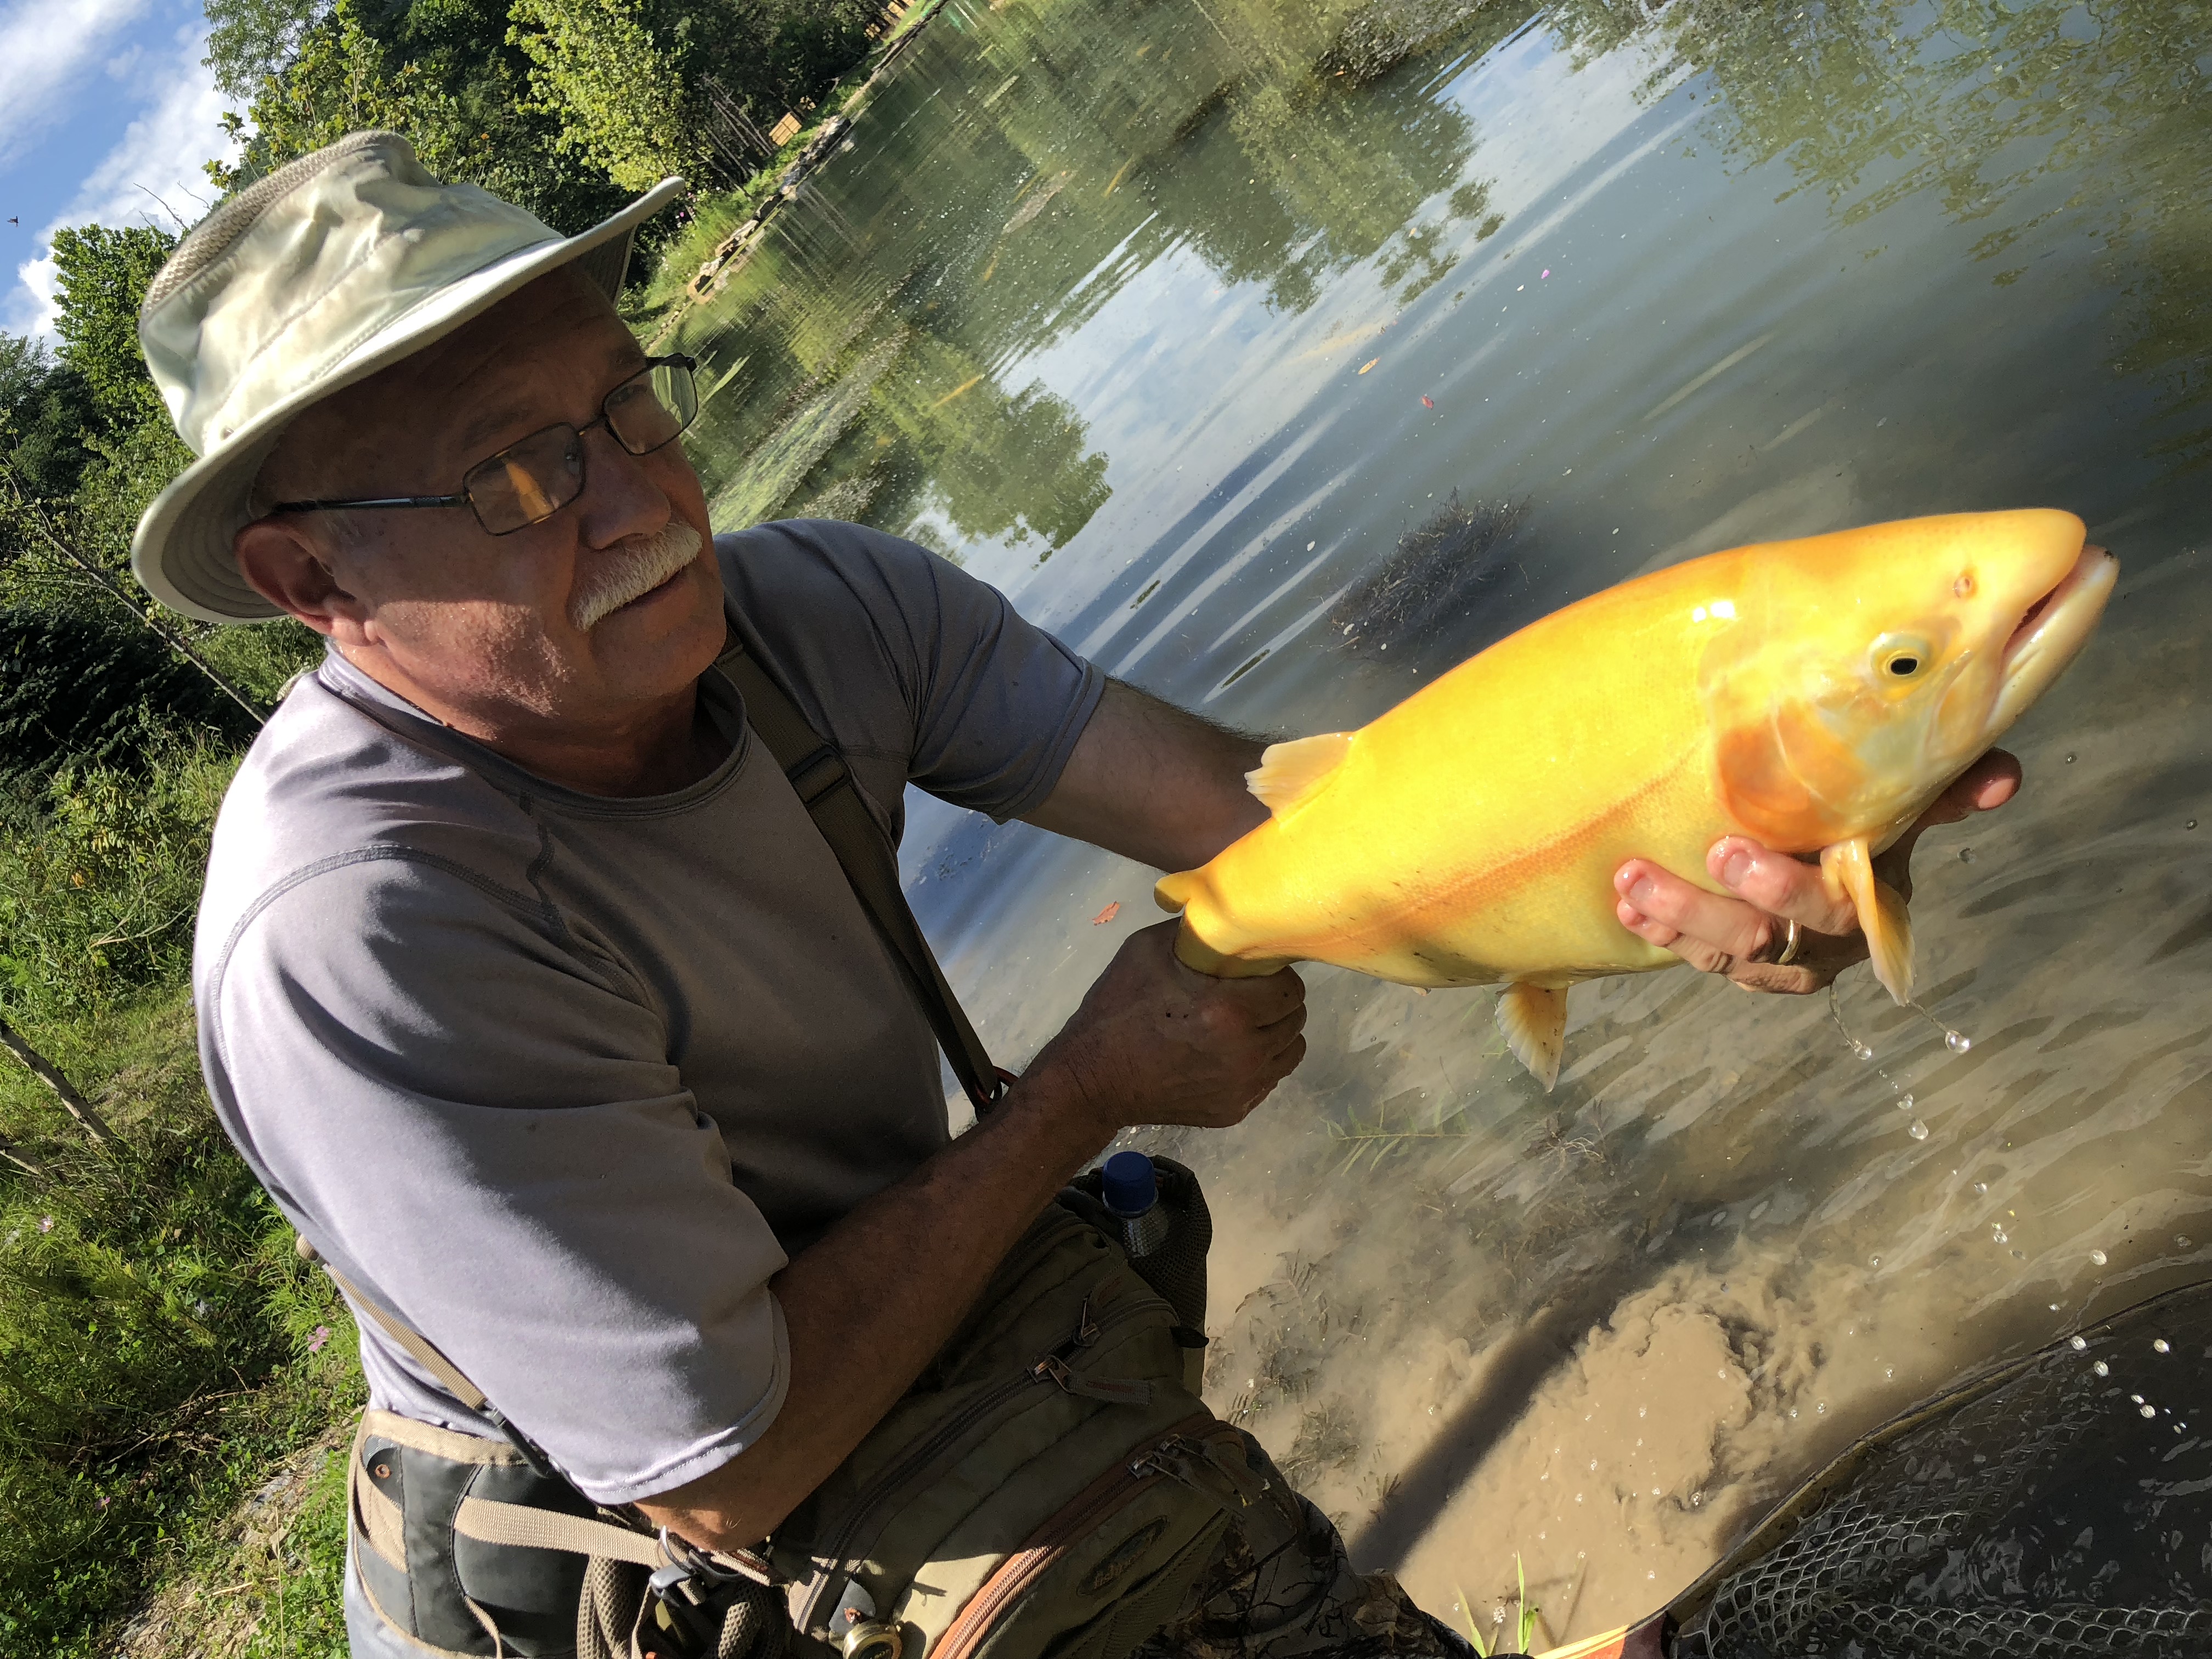 James Crews with a golden trout,Mountain water adventures, fly fishing, musky fishing wv, fly fishing wv, fly fishing for musky, native trout, group trip fly fishing, trout fishing wv, musky on a fly, rainbow trout wv, spring fed fly fishing streams, brown trout wv, golden trout wv, certified fishing guide, certified fishing guide wv, wv, west Virginia, private water fly fishing, west Virginia fly fishing, private fly fishing, private land fly fishing, Monroe County WV, Greenbrier County WV, stream restoration, restored fly fishing stream, Greenbrier, Greenbrier resort, White Sulphur Springs, fly casting instruction, James Crews, Clare Lyons, Second Creek, Drop Lick Creek, the New River, Lazy River, fly fishing gear